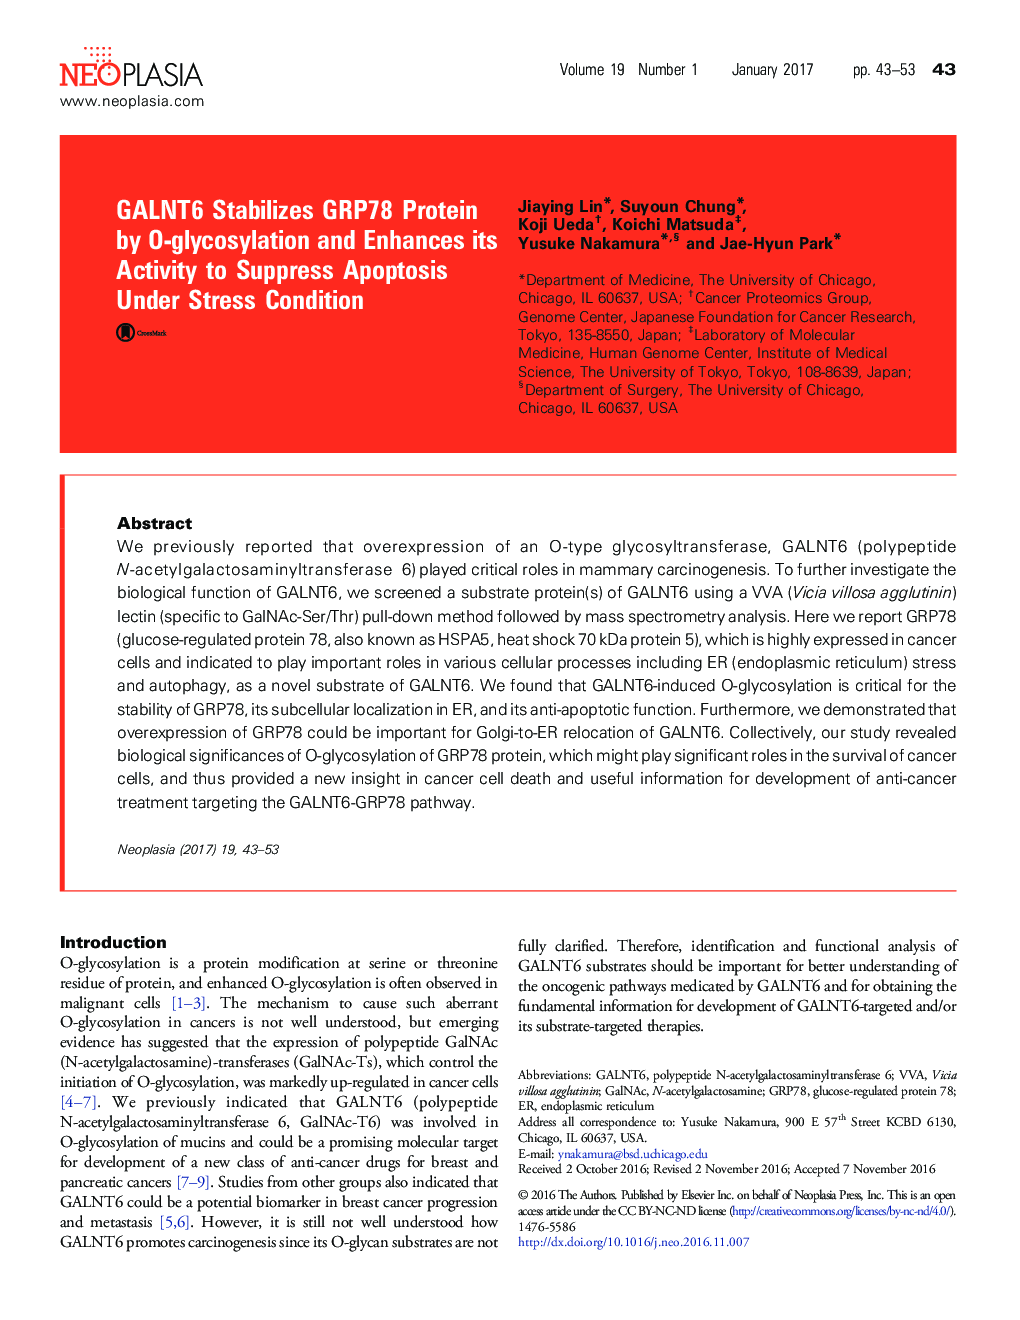 GALNT6 Stabilizes GRP78 Protein by O-glycosylation and Enhances its Activity to Suppress Apoptosis Under Stress Condition